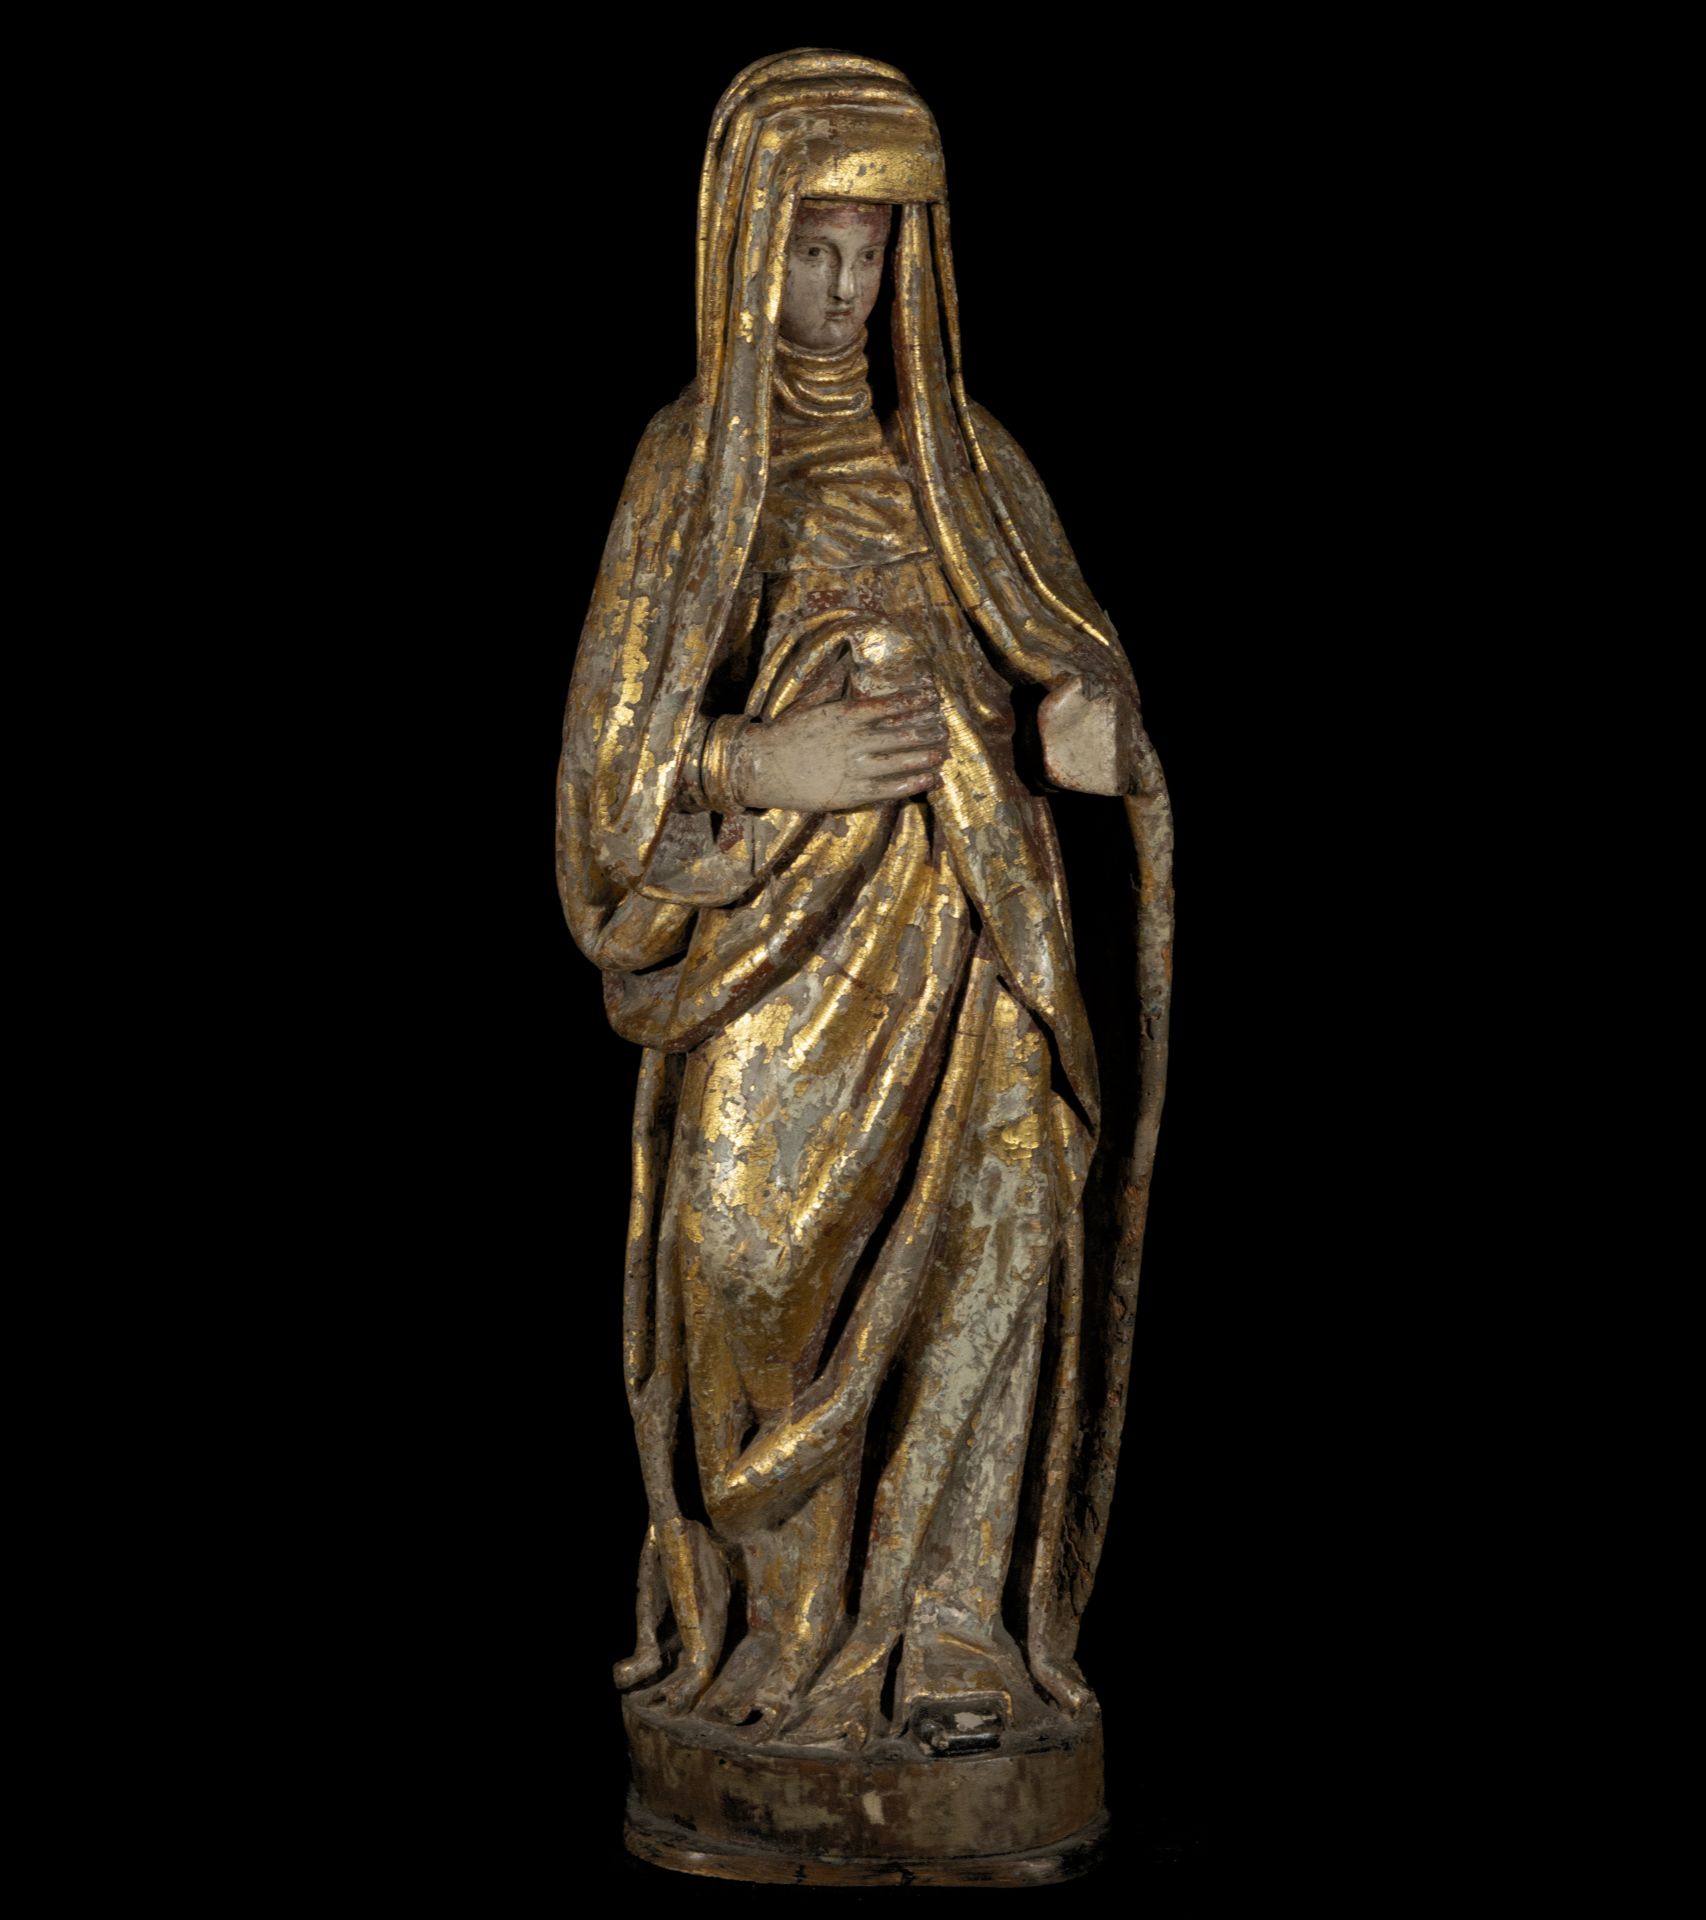 Brabant school of the 15th century - early 16th century, Great Virgin Sorrowful